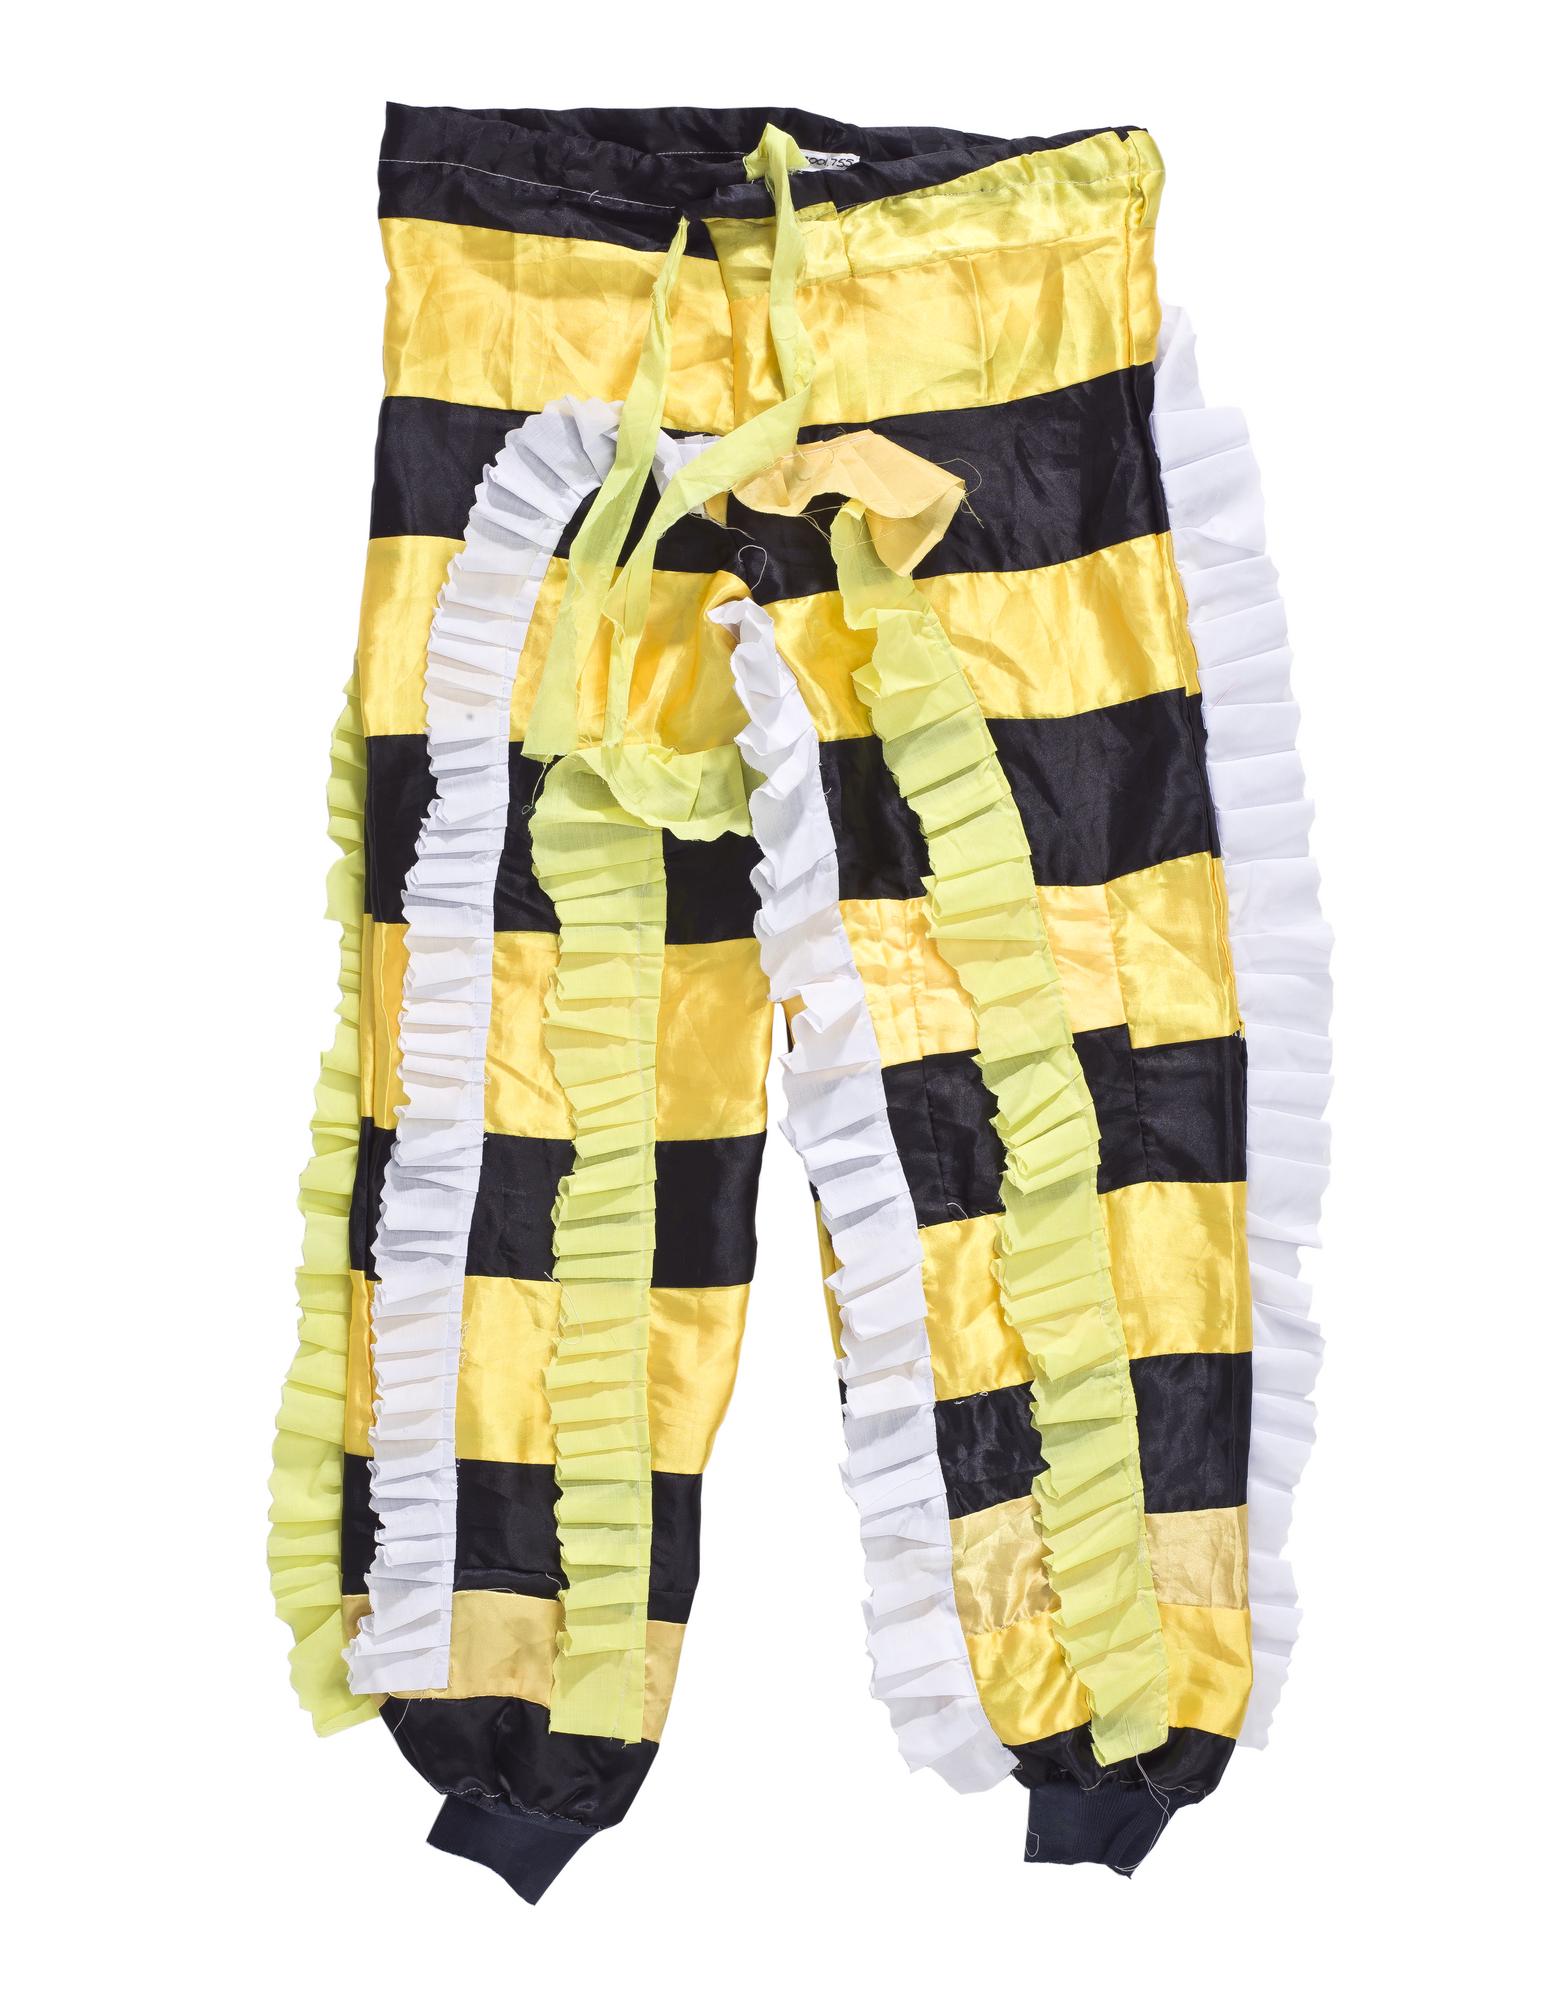 Drawstring trousers made to be worn as part of 'Fine Lady' fancy dress masquerade costume, made of yellow and black man-made fabric with yellow and white frills, originally purchased by Donatus Archibald Acquandoh (alias Hippies) from a tailor in Winneba: Africa, West Africa, Ghana, Winneba, 2000 